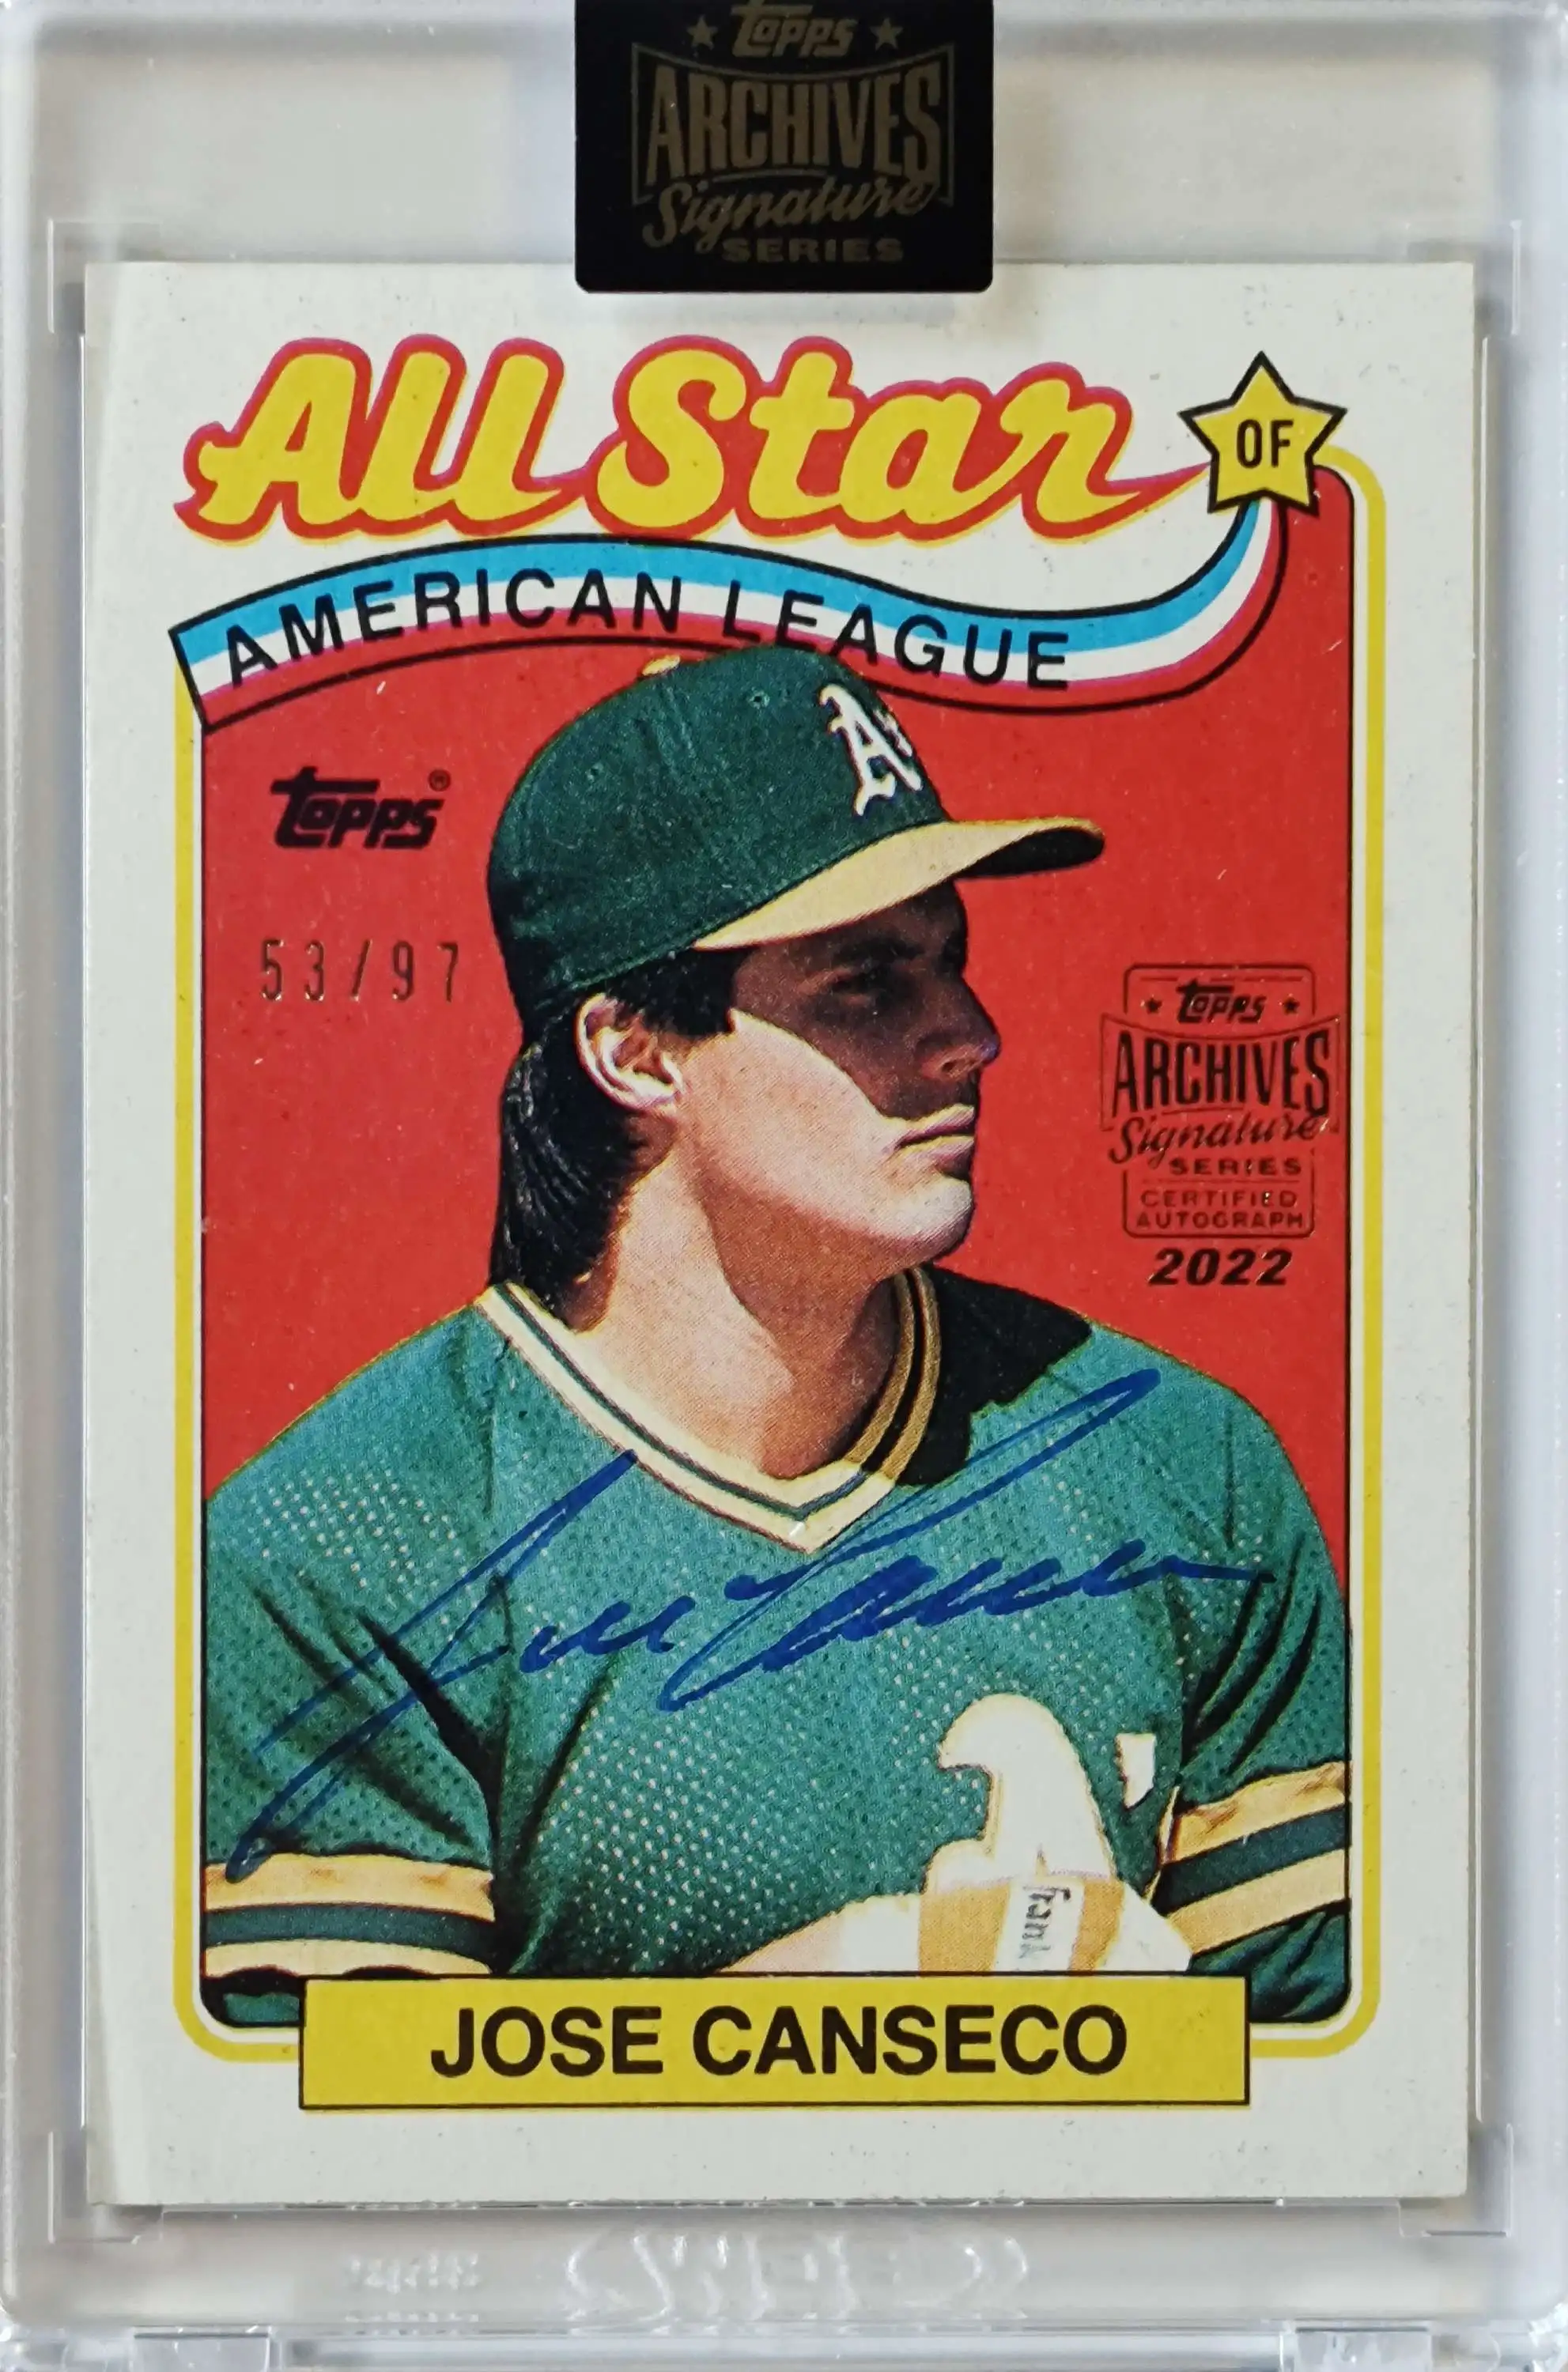 MLB 2022 Topps Archives Signature Series Jose Canseco 5397 Trading Card -  ToyWiz